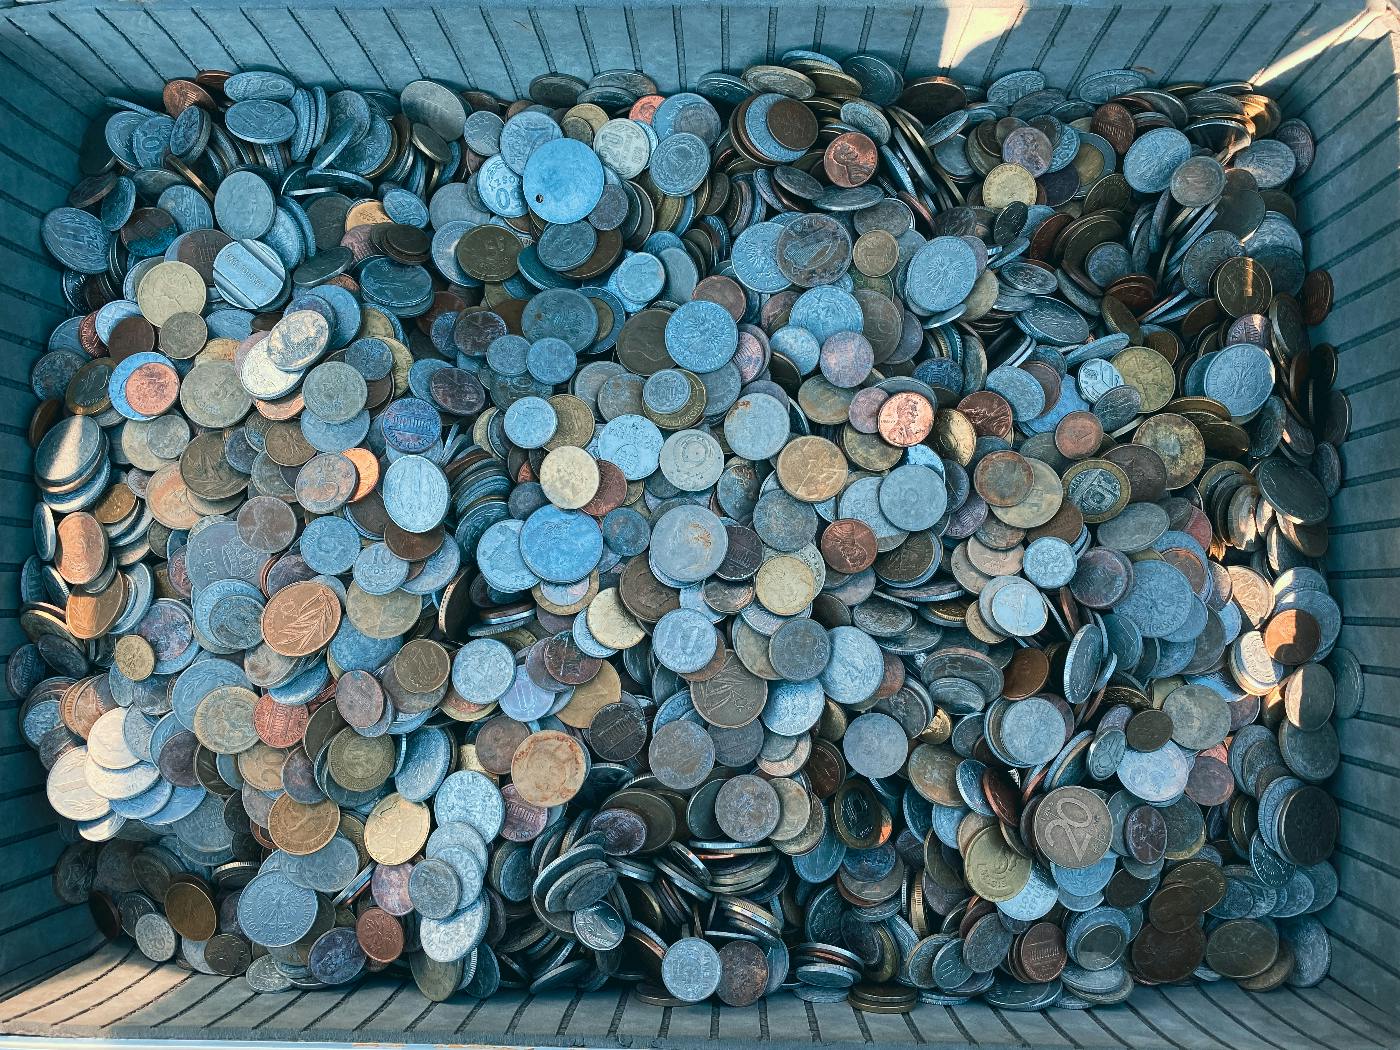 A box full of thousands of different coins